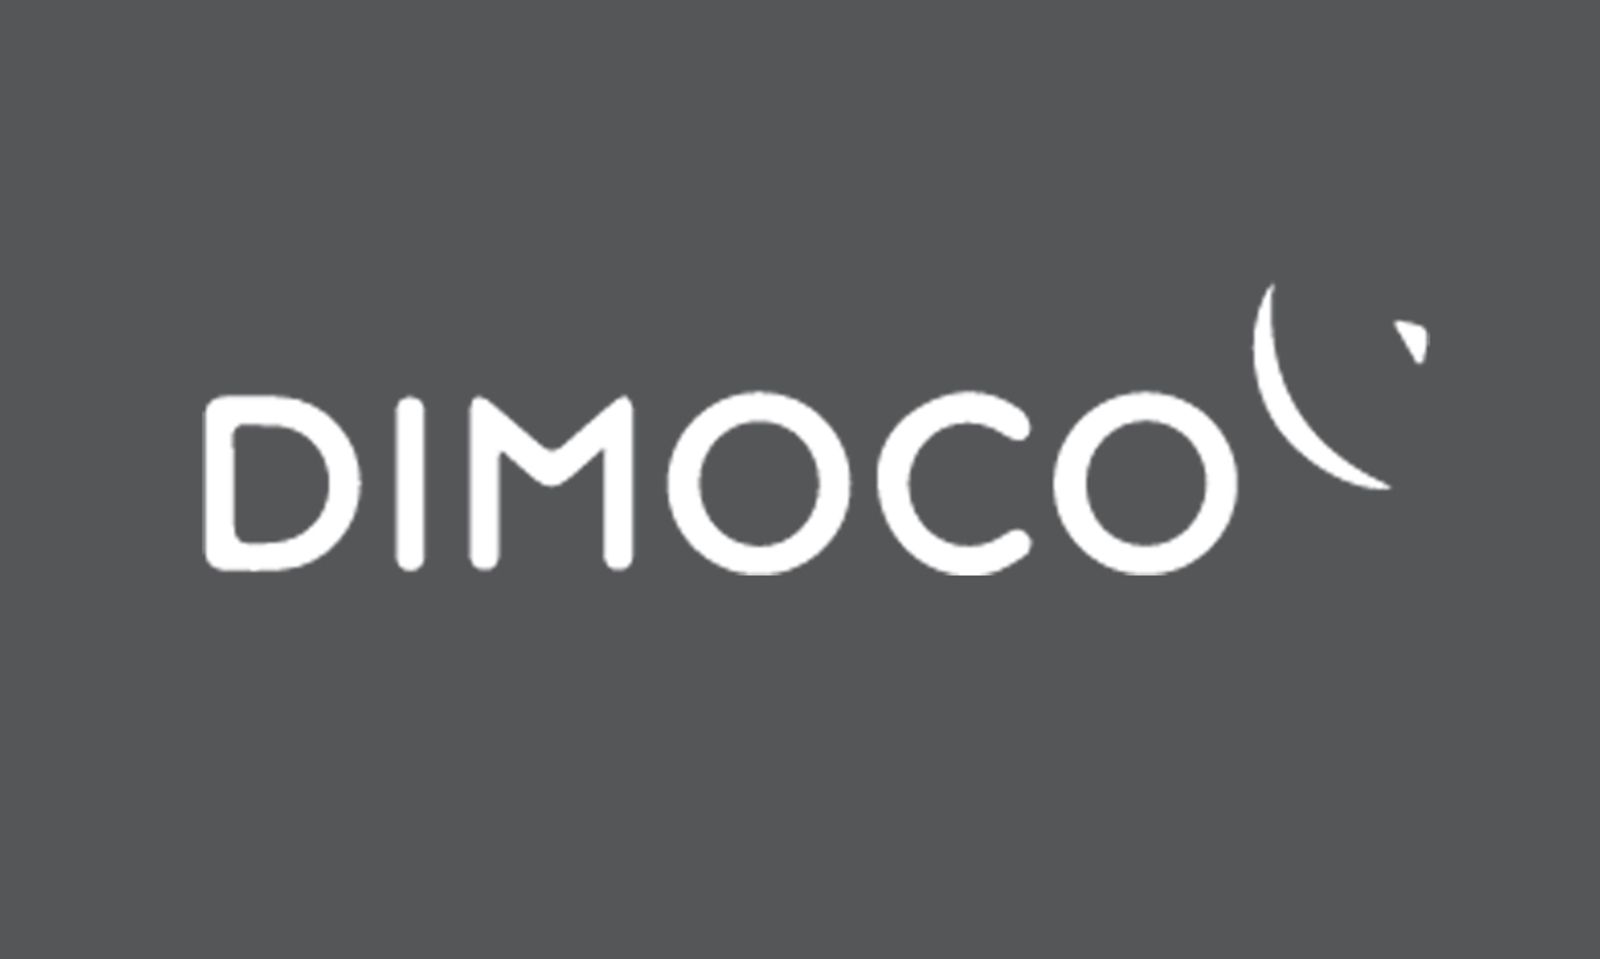 DIMOCO Mobile Payment Now Available in the UK, Ireland and Australia